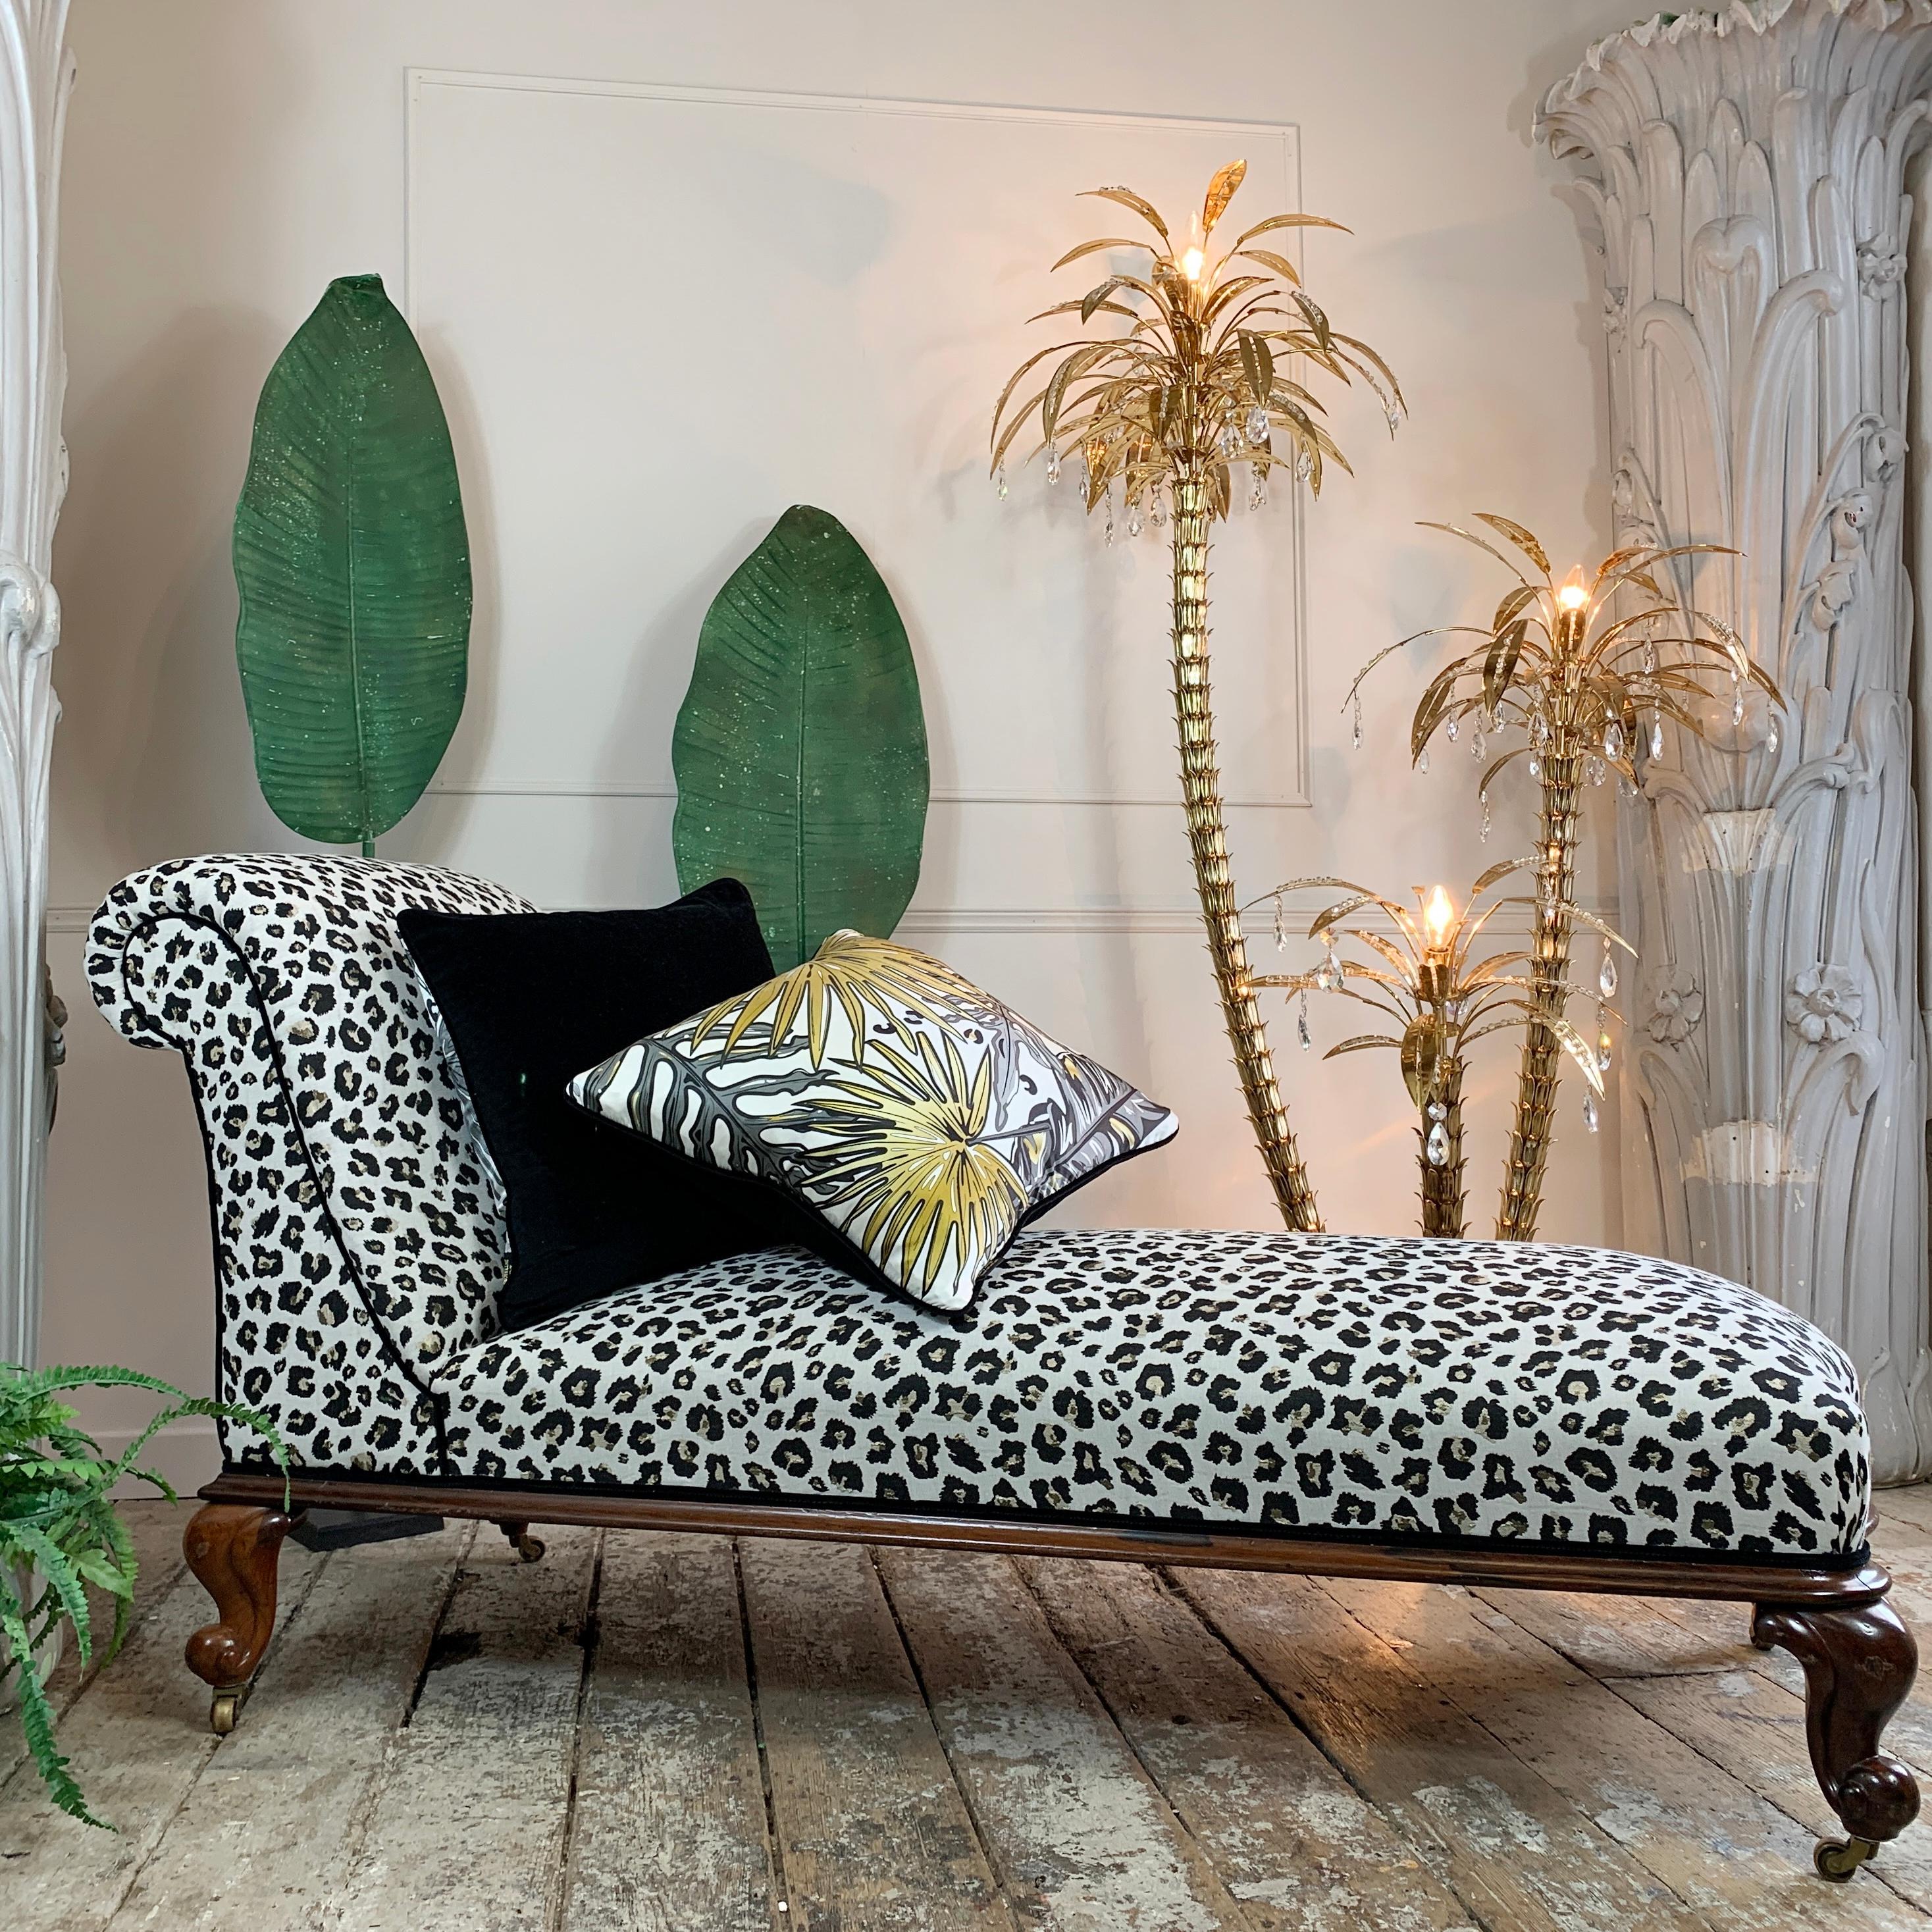 An elegant and exceptional Victorian chaise longue, early 19th century.

Newly upholstered in a stunning hand picked woven Leopard Jacquard fabric, black and gold leopard pattern on a white toned base, trimmed all around with rich black velvet